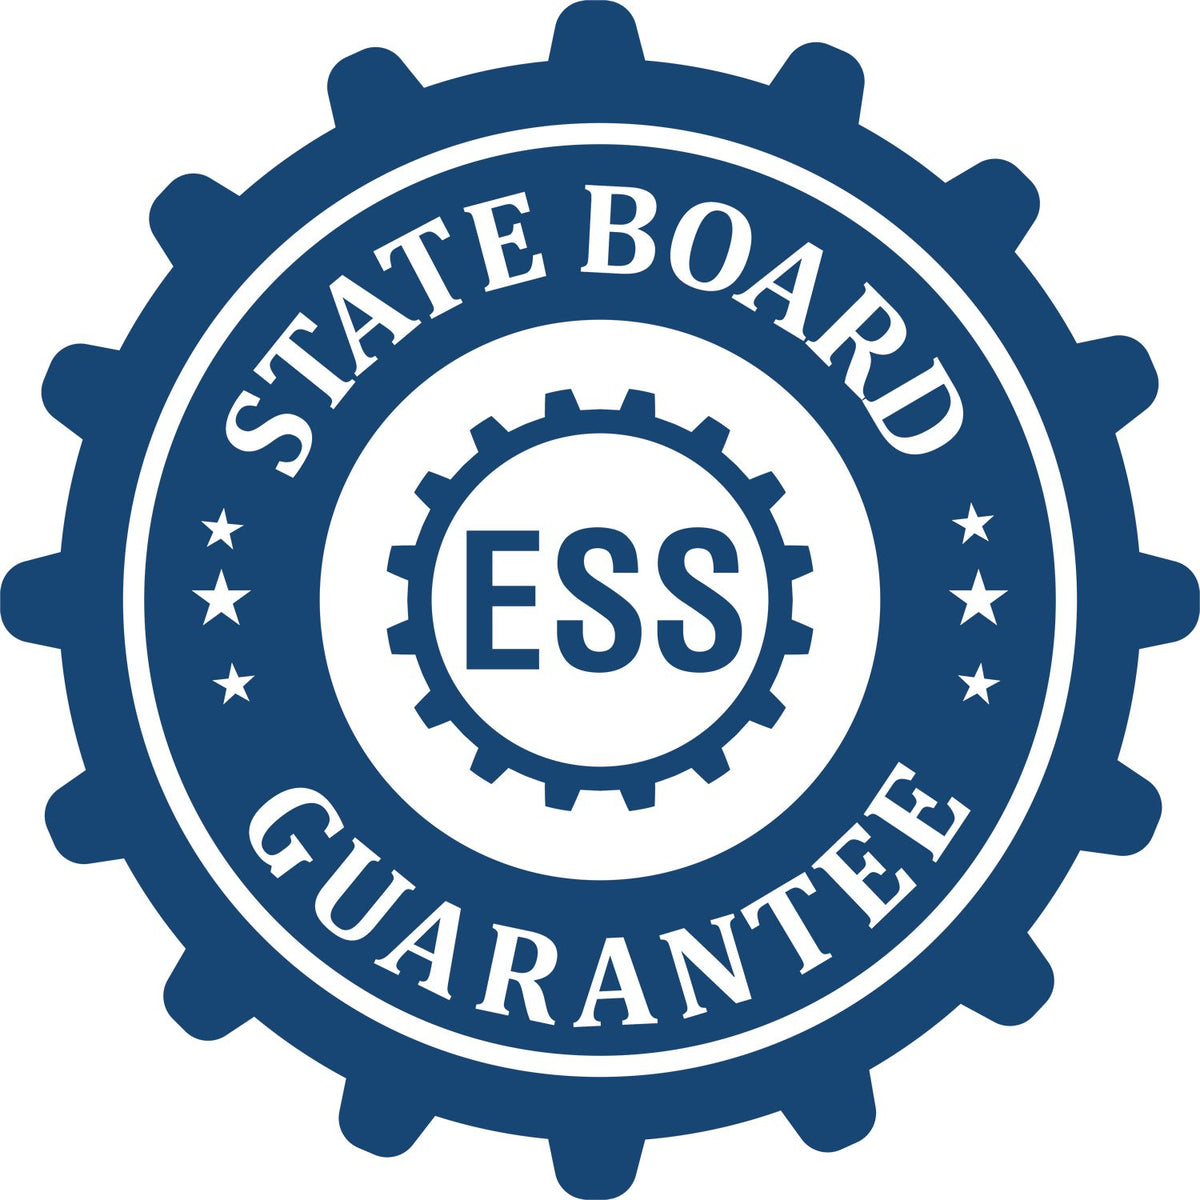 An emblem in a gear shape illustrating a state board guarantee for the State of Maine Extended Long Reach Geologist Seal